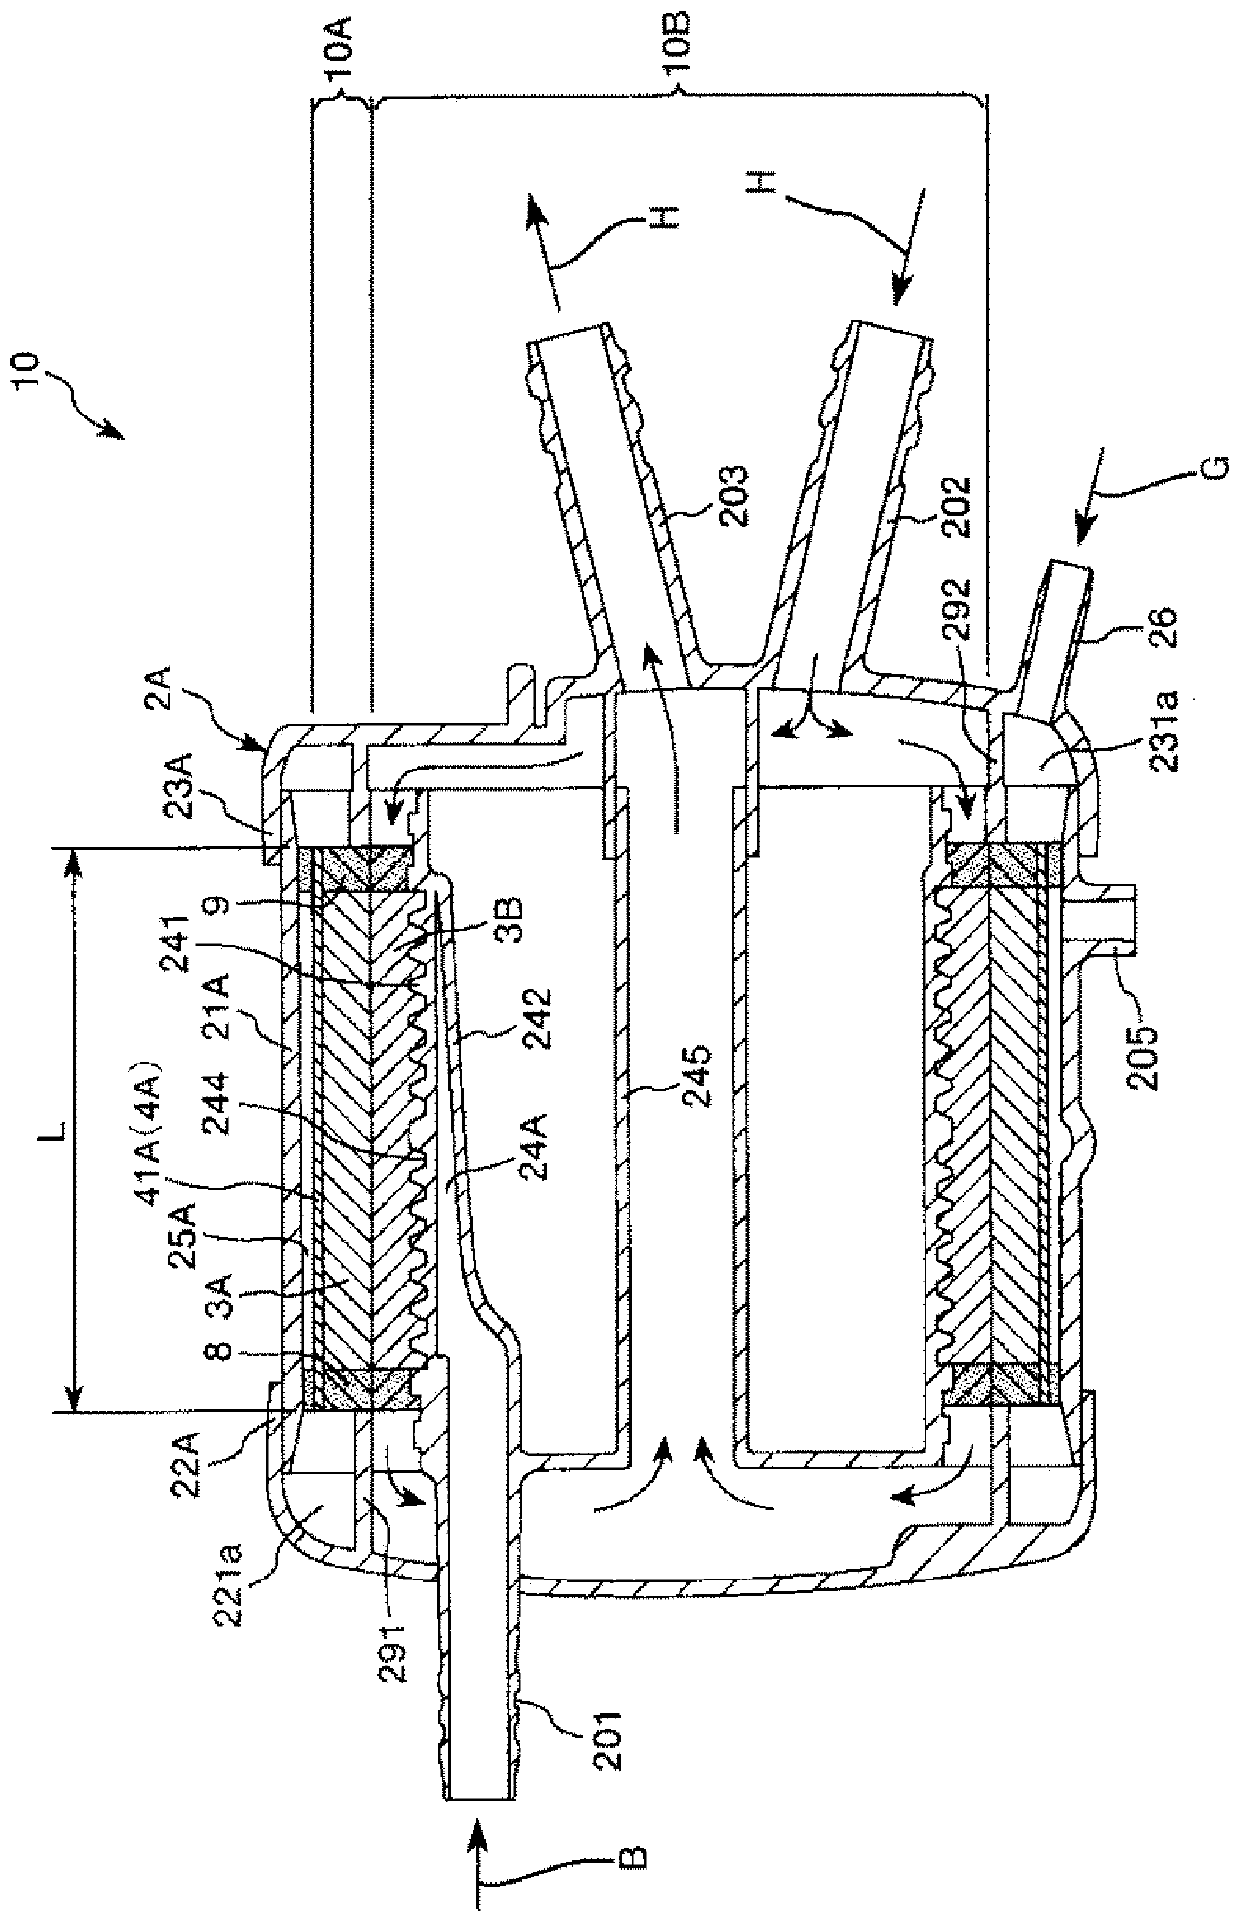 Heat exchanger and artificial lung